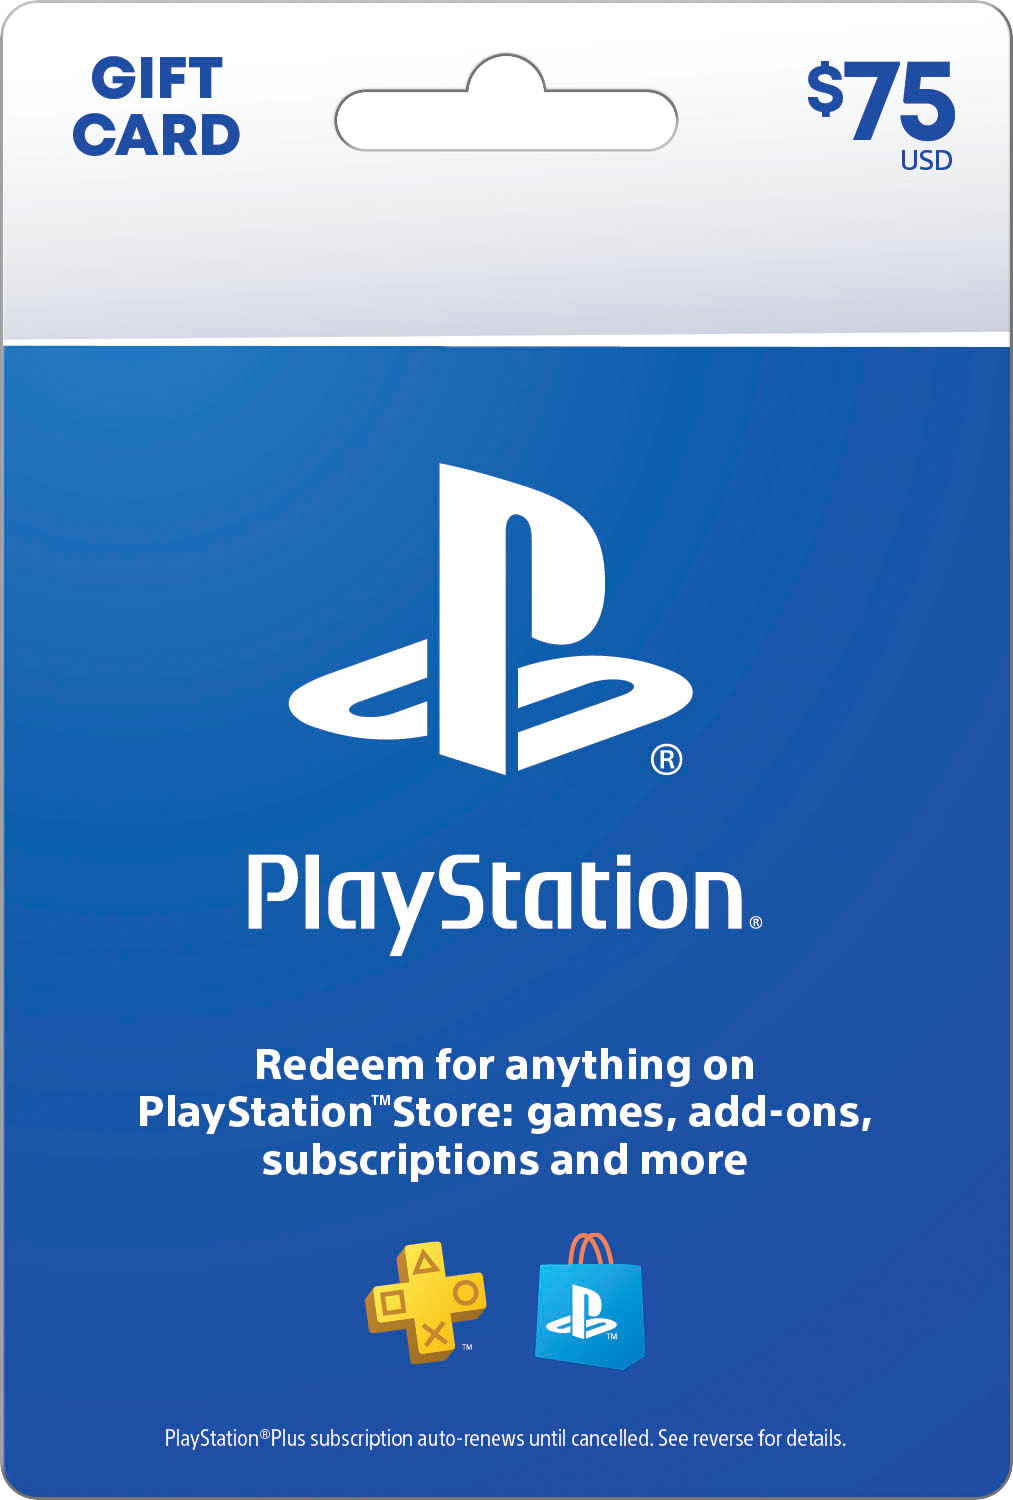 Sony PlayStation Network $20 Gift Card PSN - $20 - Best Buy